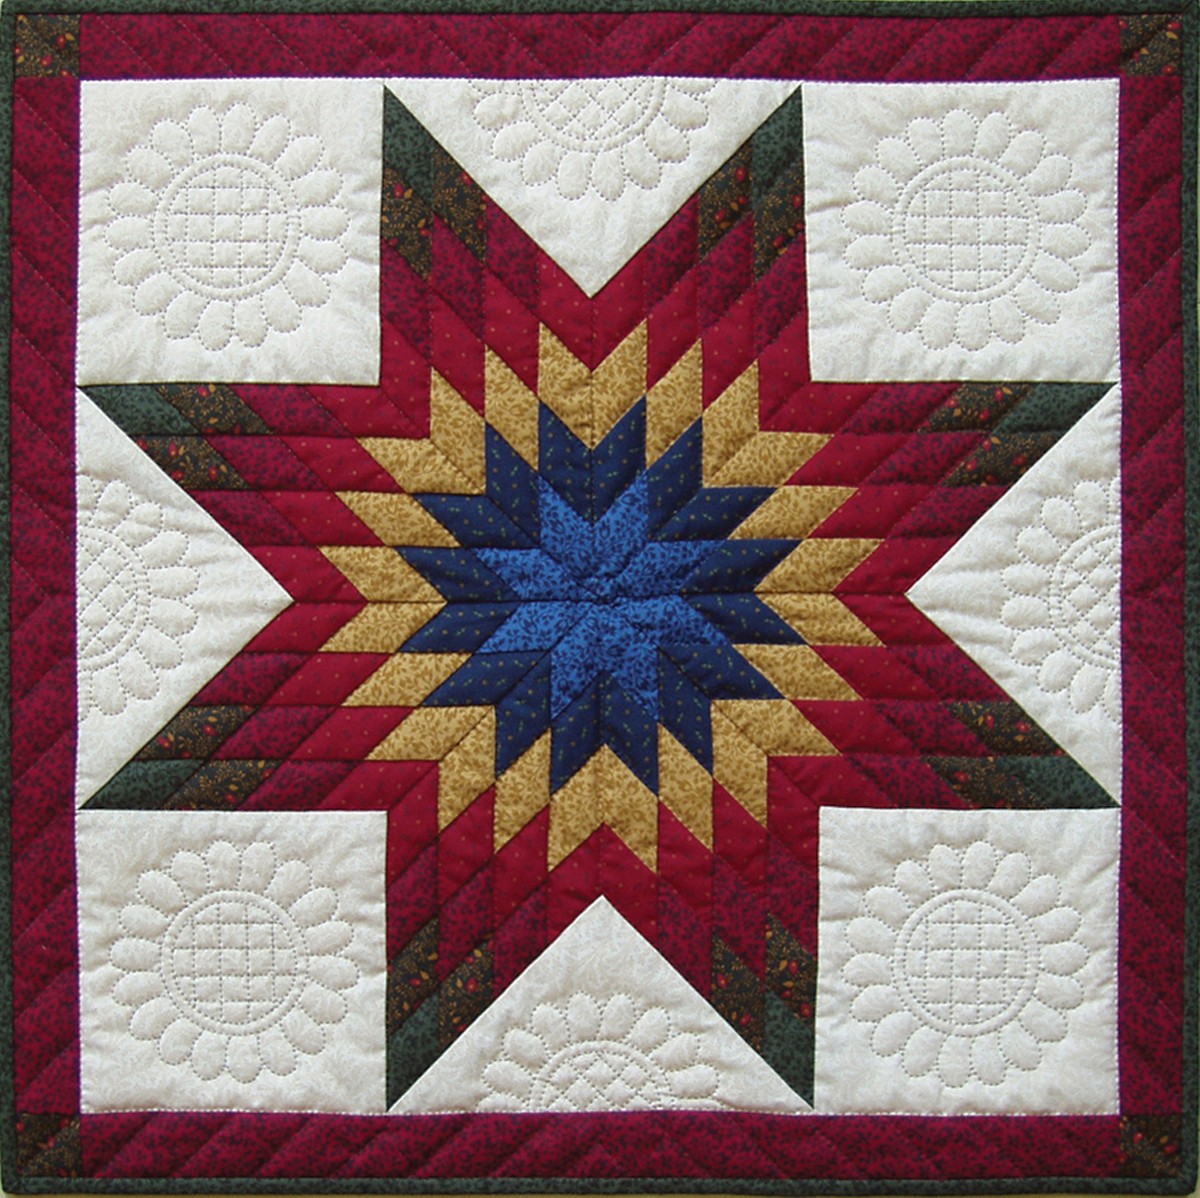 The intricately beautiful Lone Star quilt design.